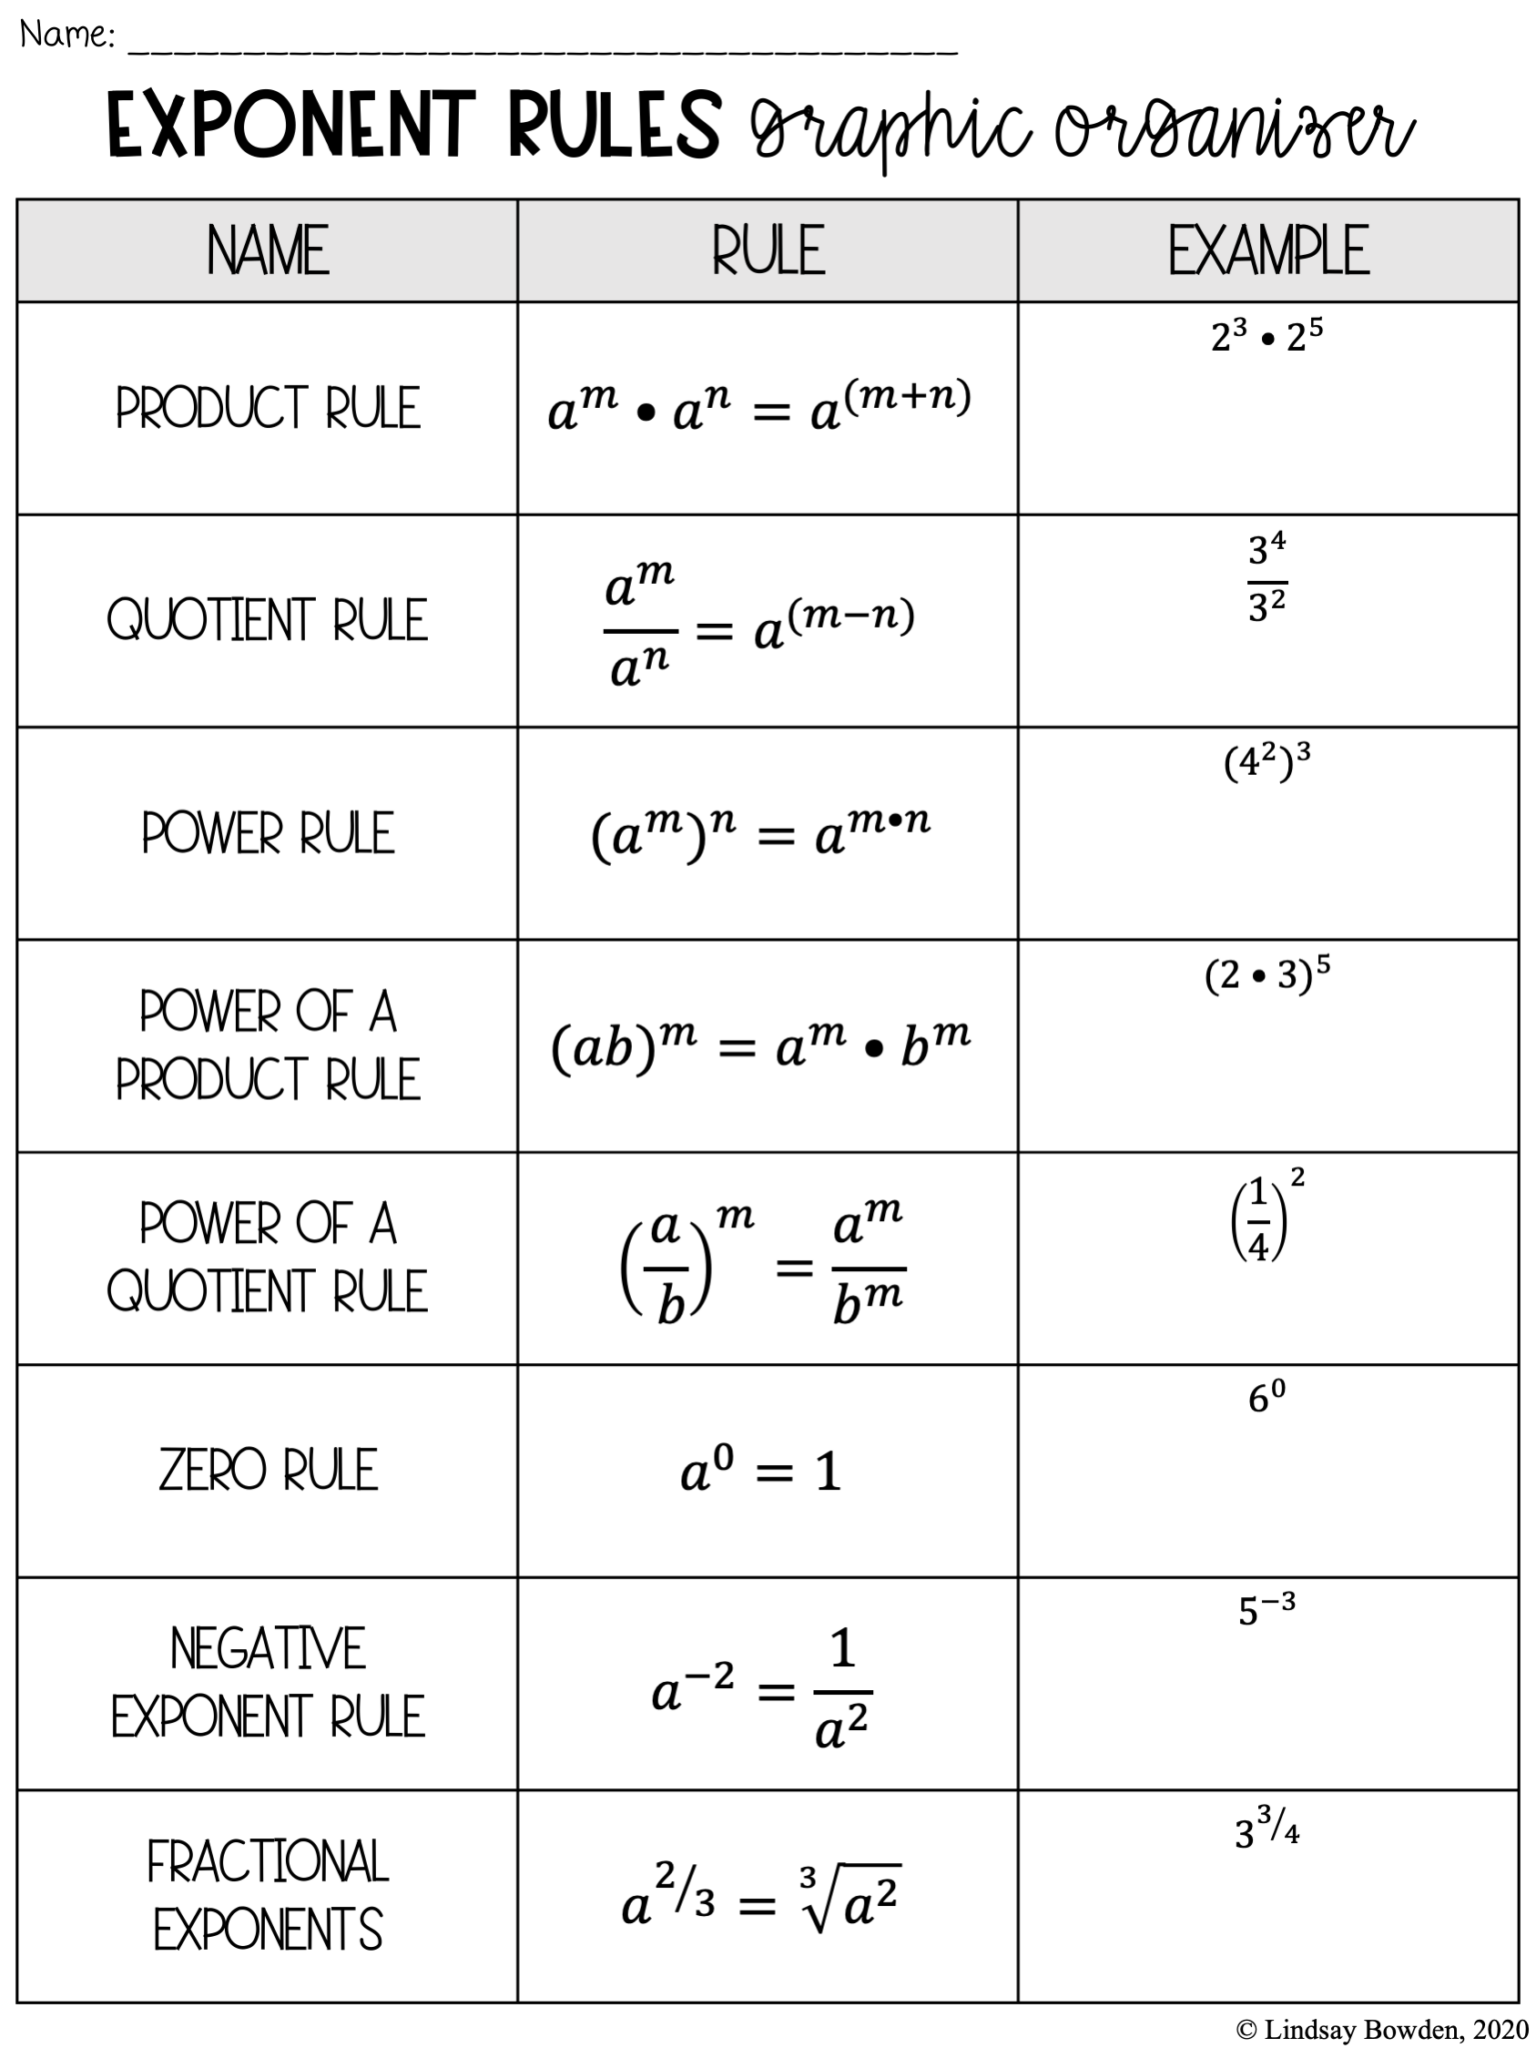 exponent-rules-graphic-organizer-lindsay-bowden